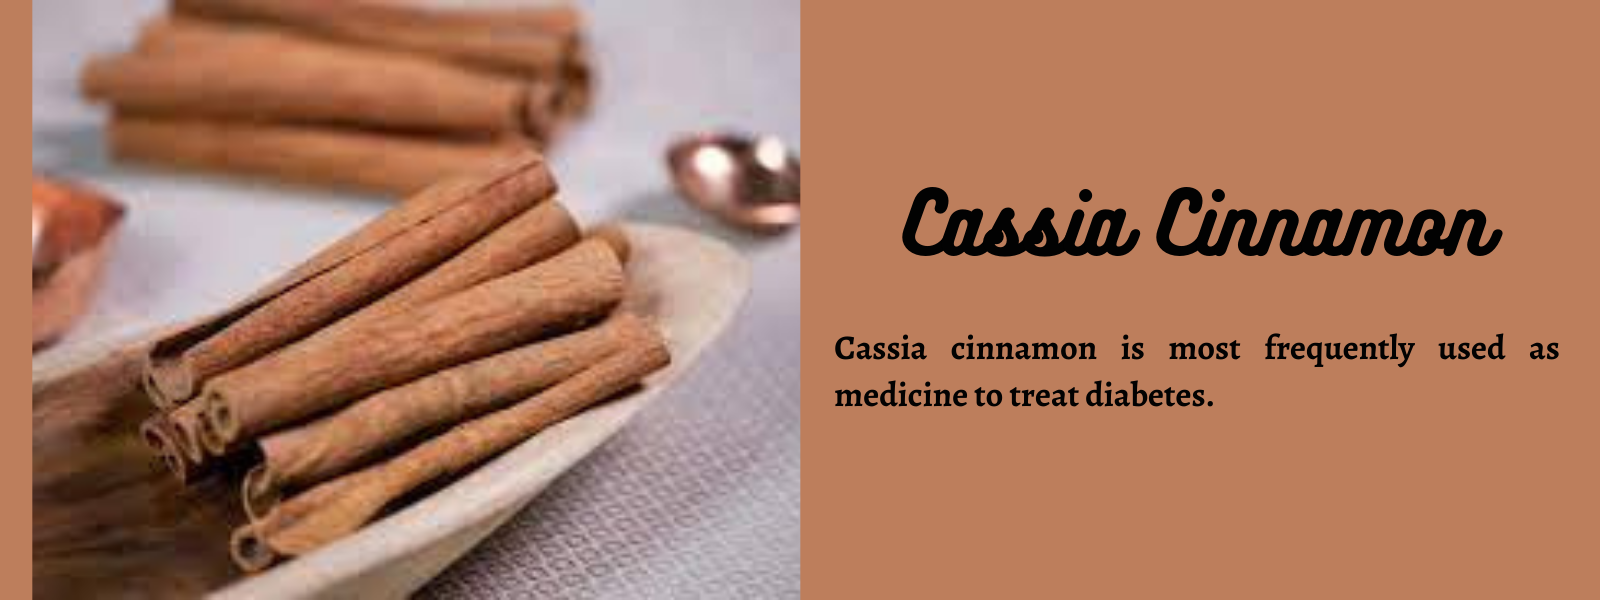 Cassia cinnamon - Health Benefits, Uses and Important Facts